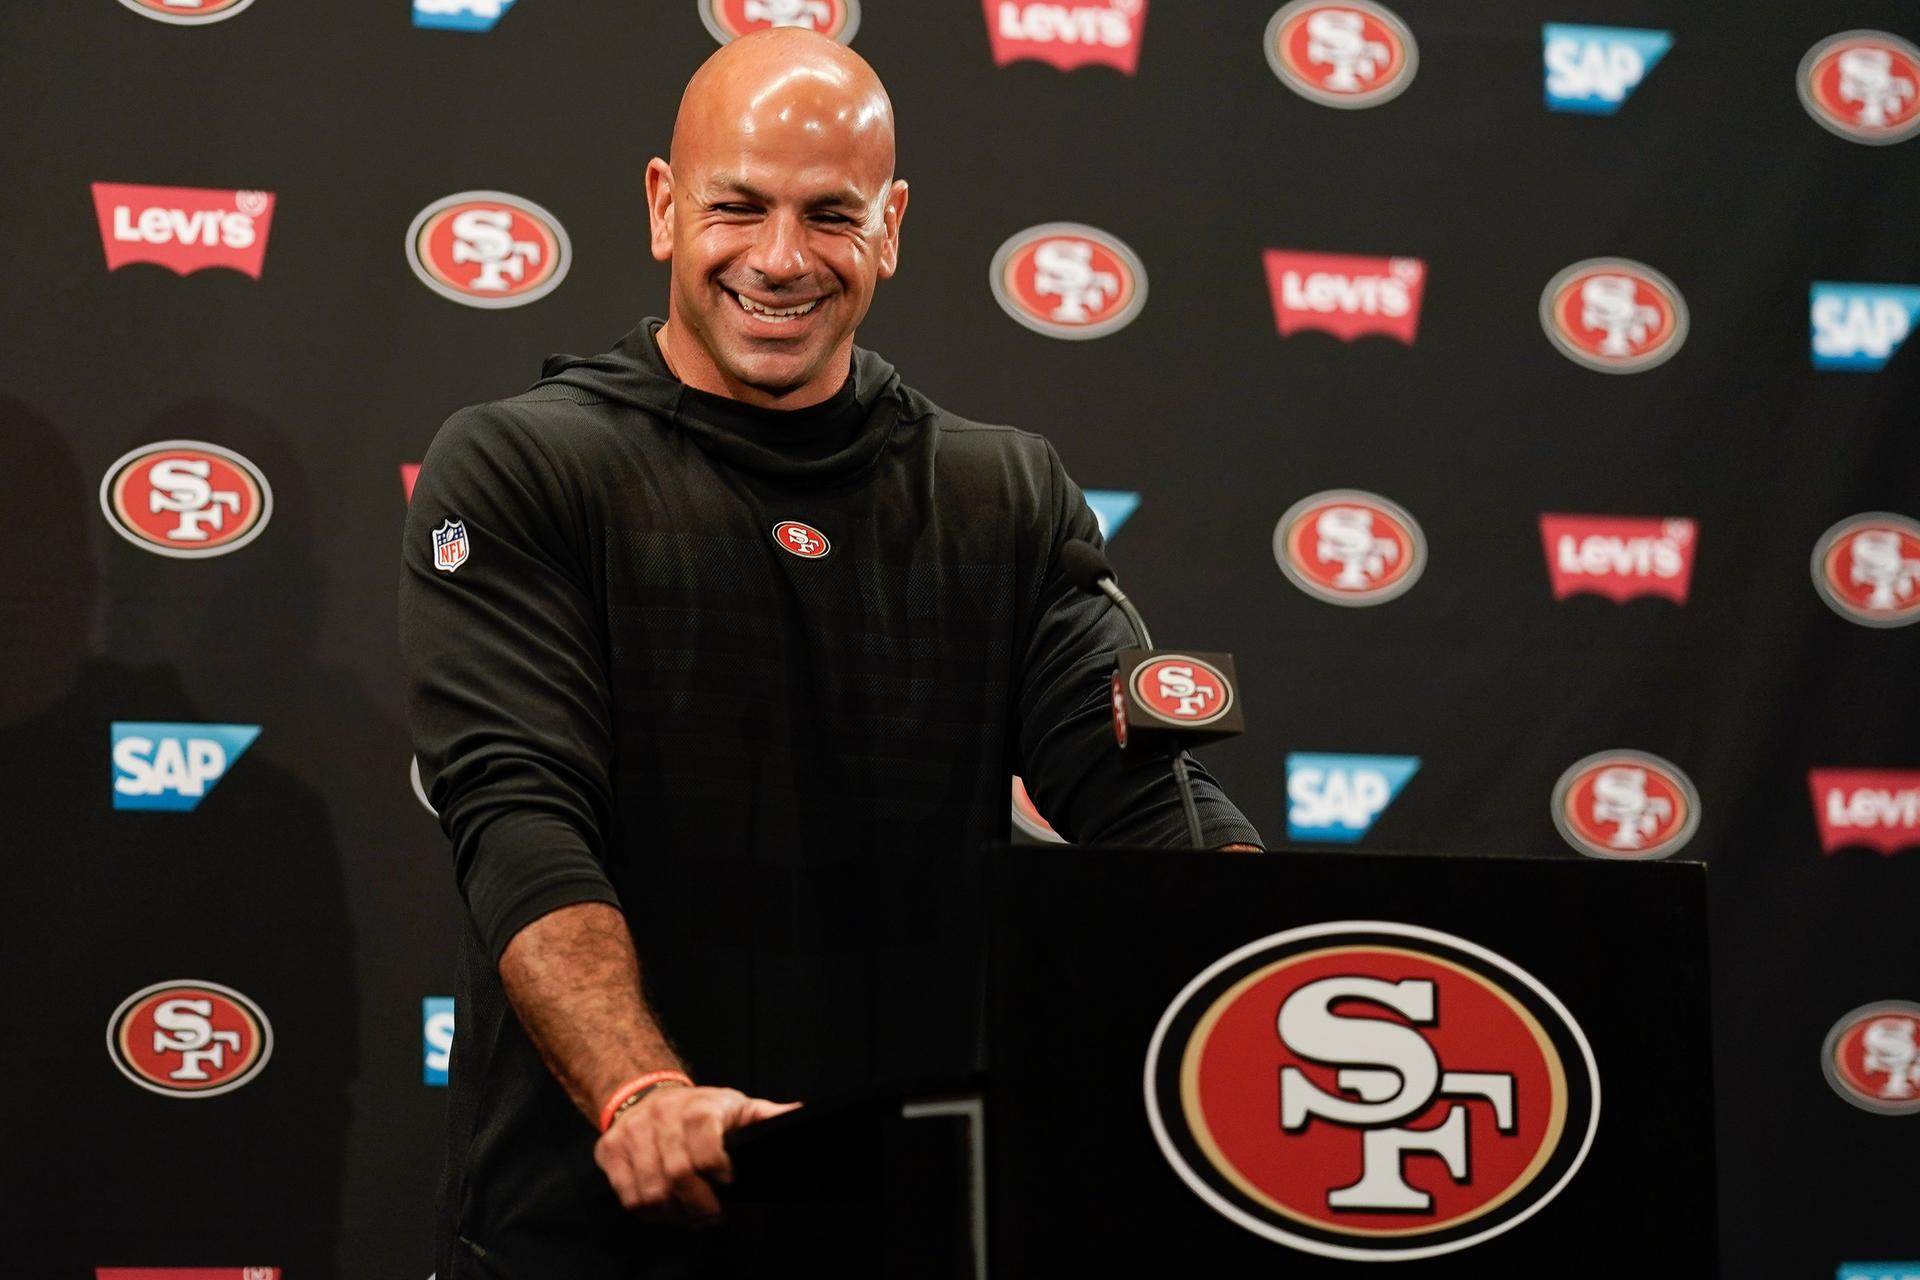 Robert Saleh, son of Lebanese immigrants, is NFL's hottest coaching prospect